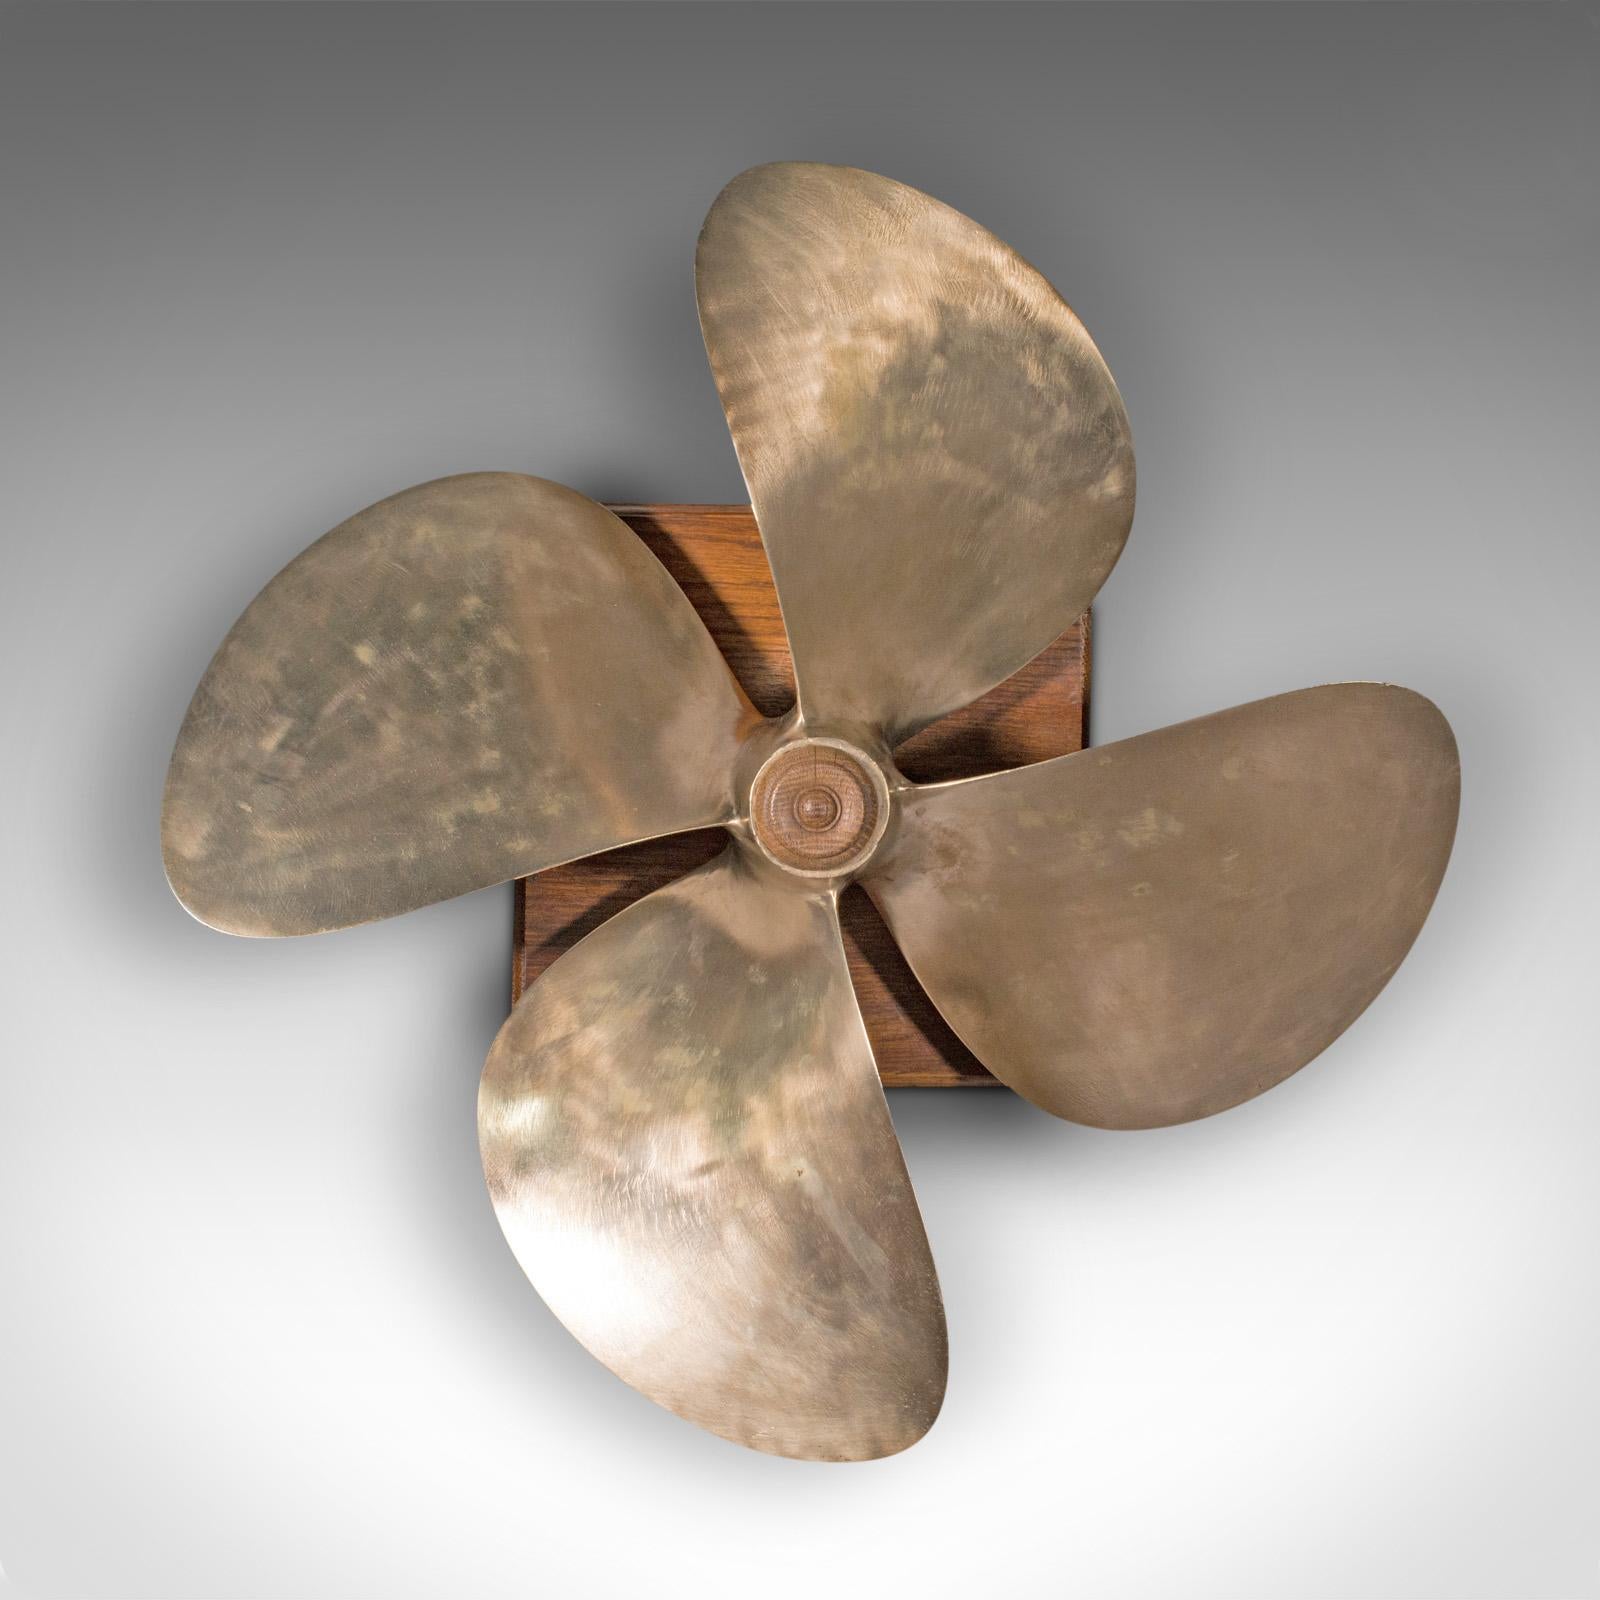 This is a large vintage mounted ship propeller. An English, bronze decorative four-blade maritime prop, dating to the mid 20th century, circa 1950.

Wonderfully presented propeller of superb proportion
Displays a desirable aged patina and in good